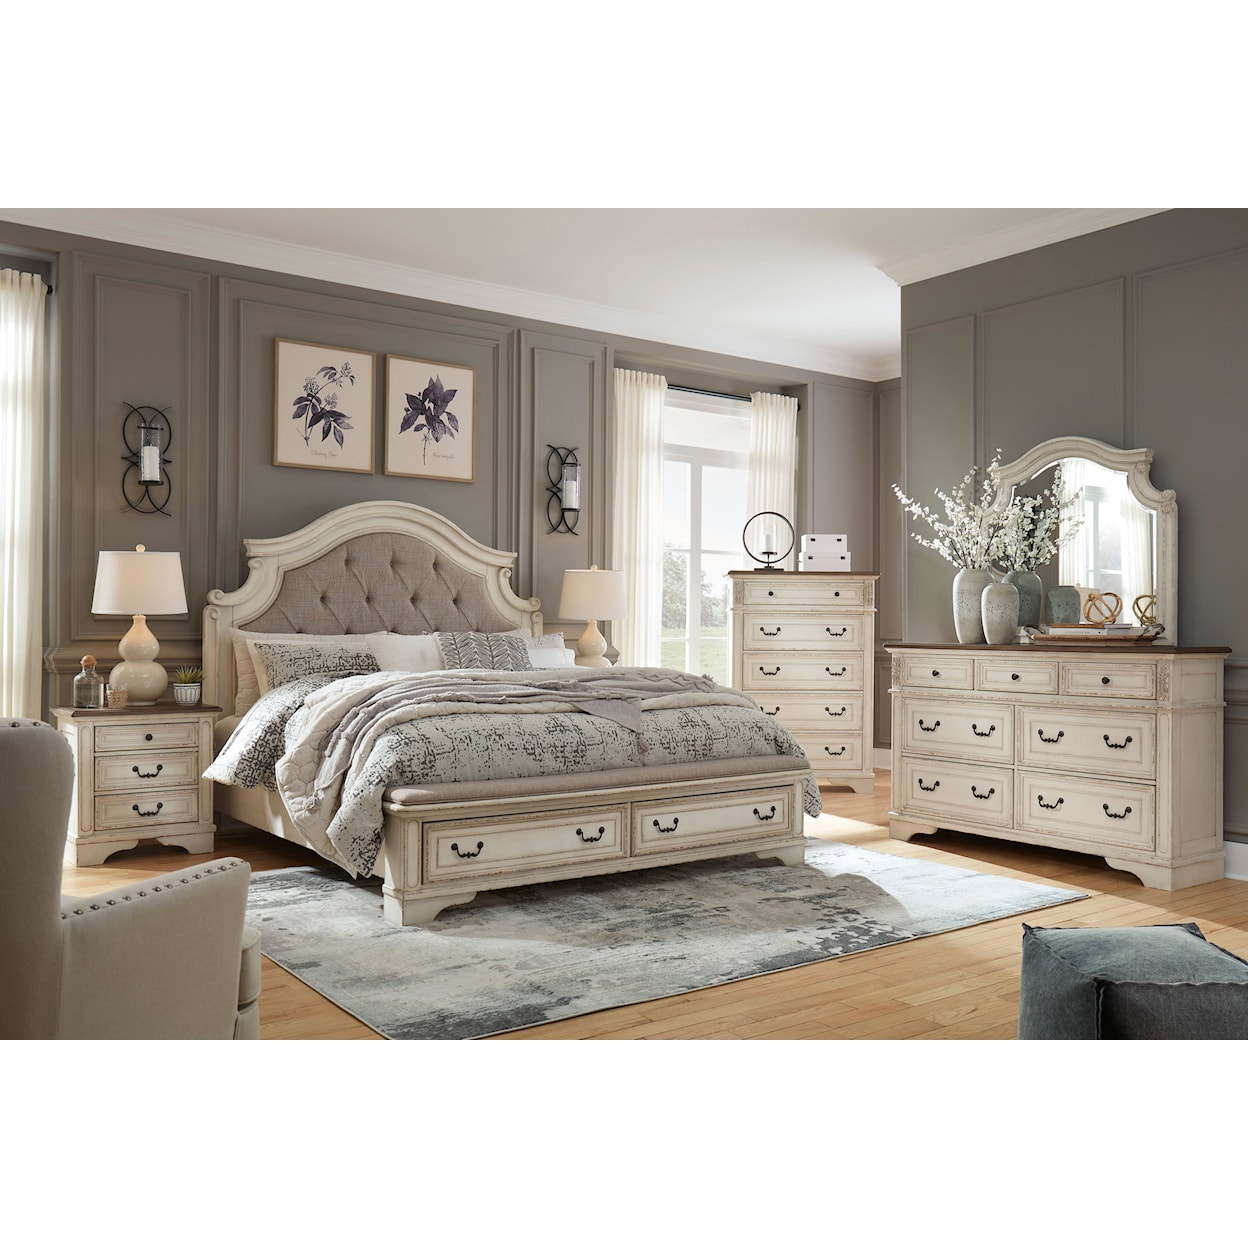 Signature Design by Ashley Realyn King Bedroom Set